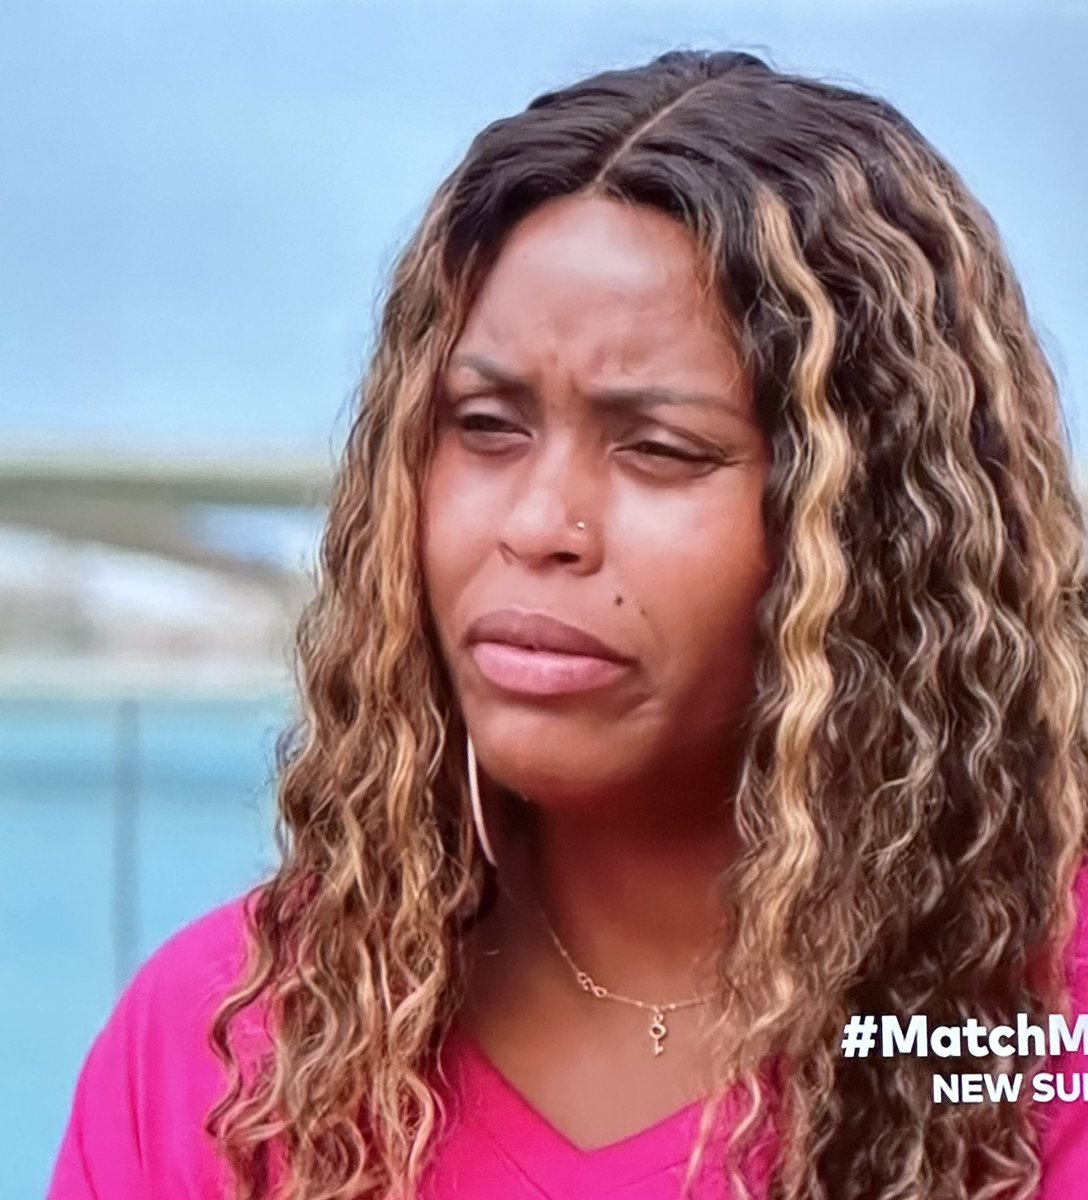 I get what the matchmaker is saying, but I don’t think this woman needs ANY help figuring out what she likes/doesn’t.

And good on her for that!! #MatchMeAbroad